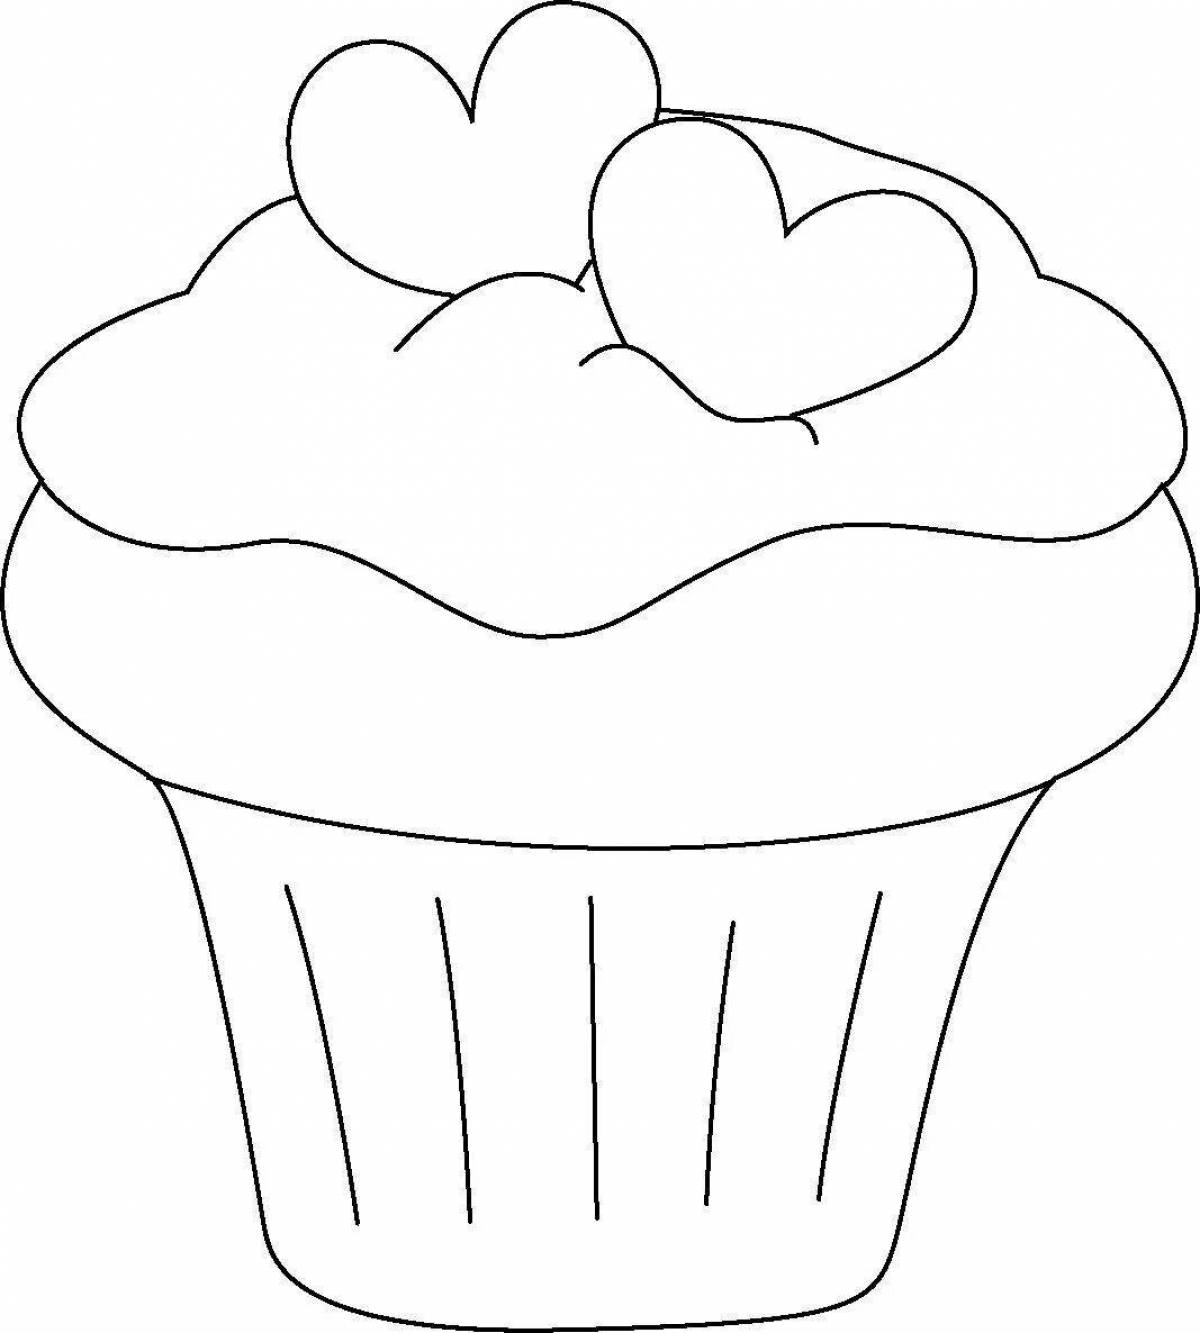 Sweet cupcake coloring pages for kids